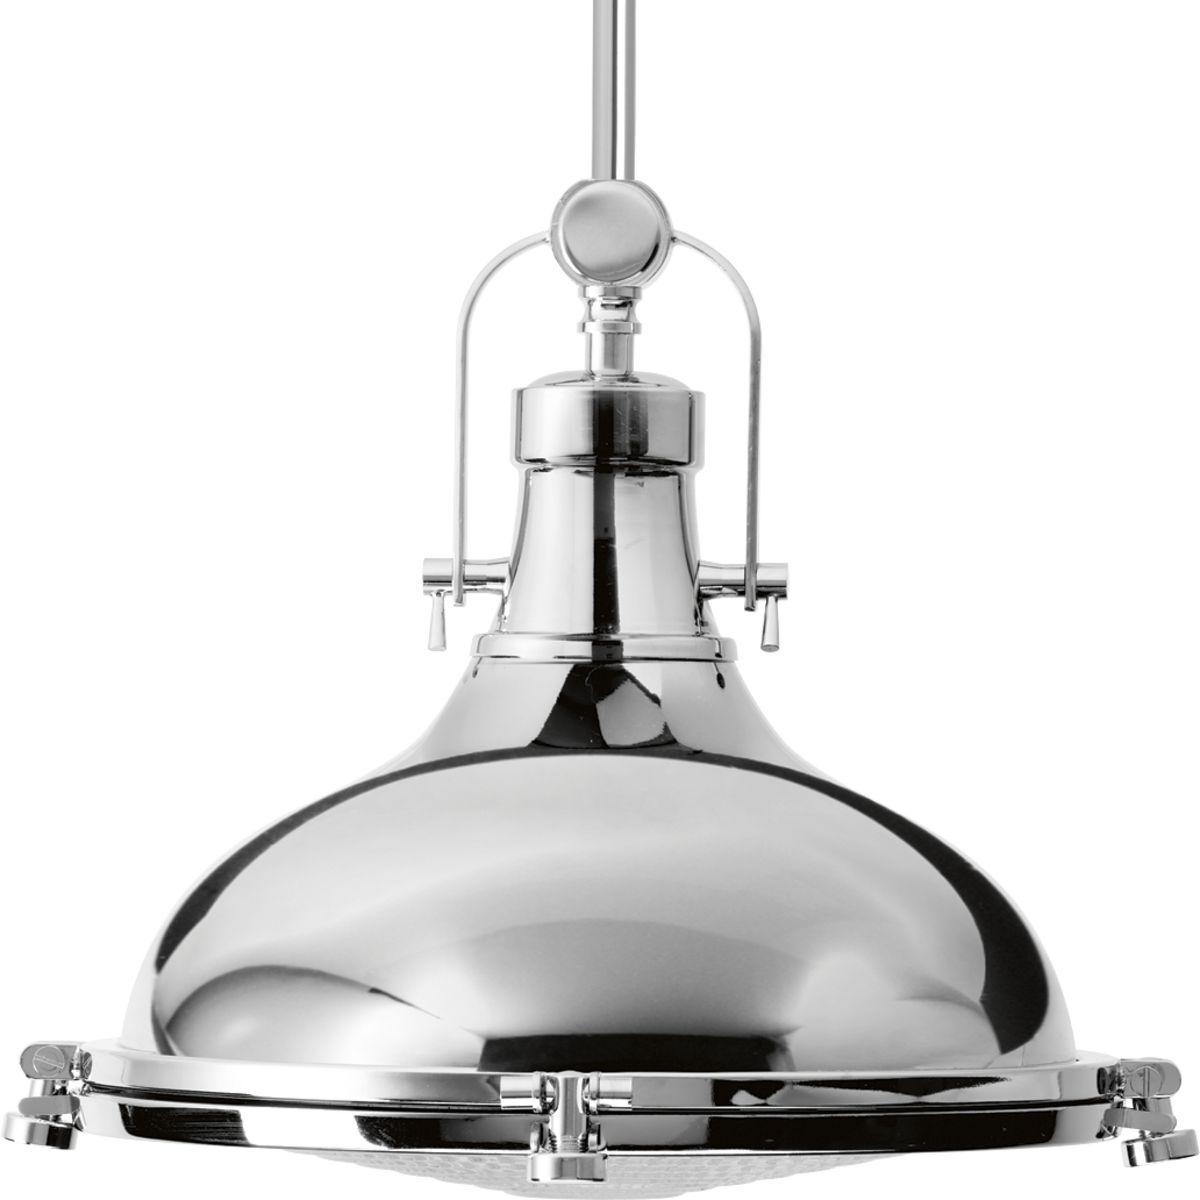 Hubbell P5188-1530K9 The one-light 12" pendant features industrial roots in both form and function. The Polished Chrome finish highlight the high-quality prismatic glass which adds to the historical aesthetic. Antique style fixture includes a hinge-locking nautical design. Pe